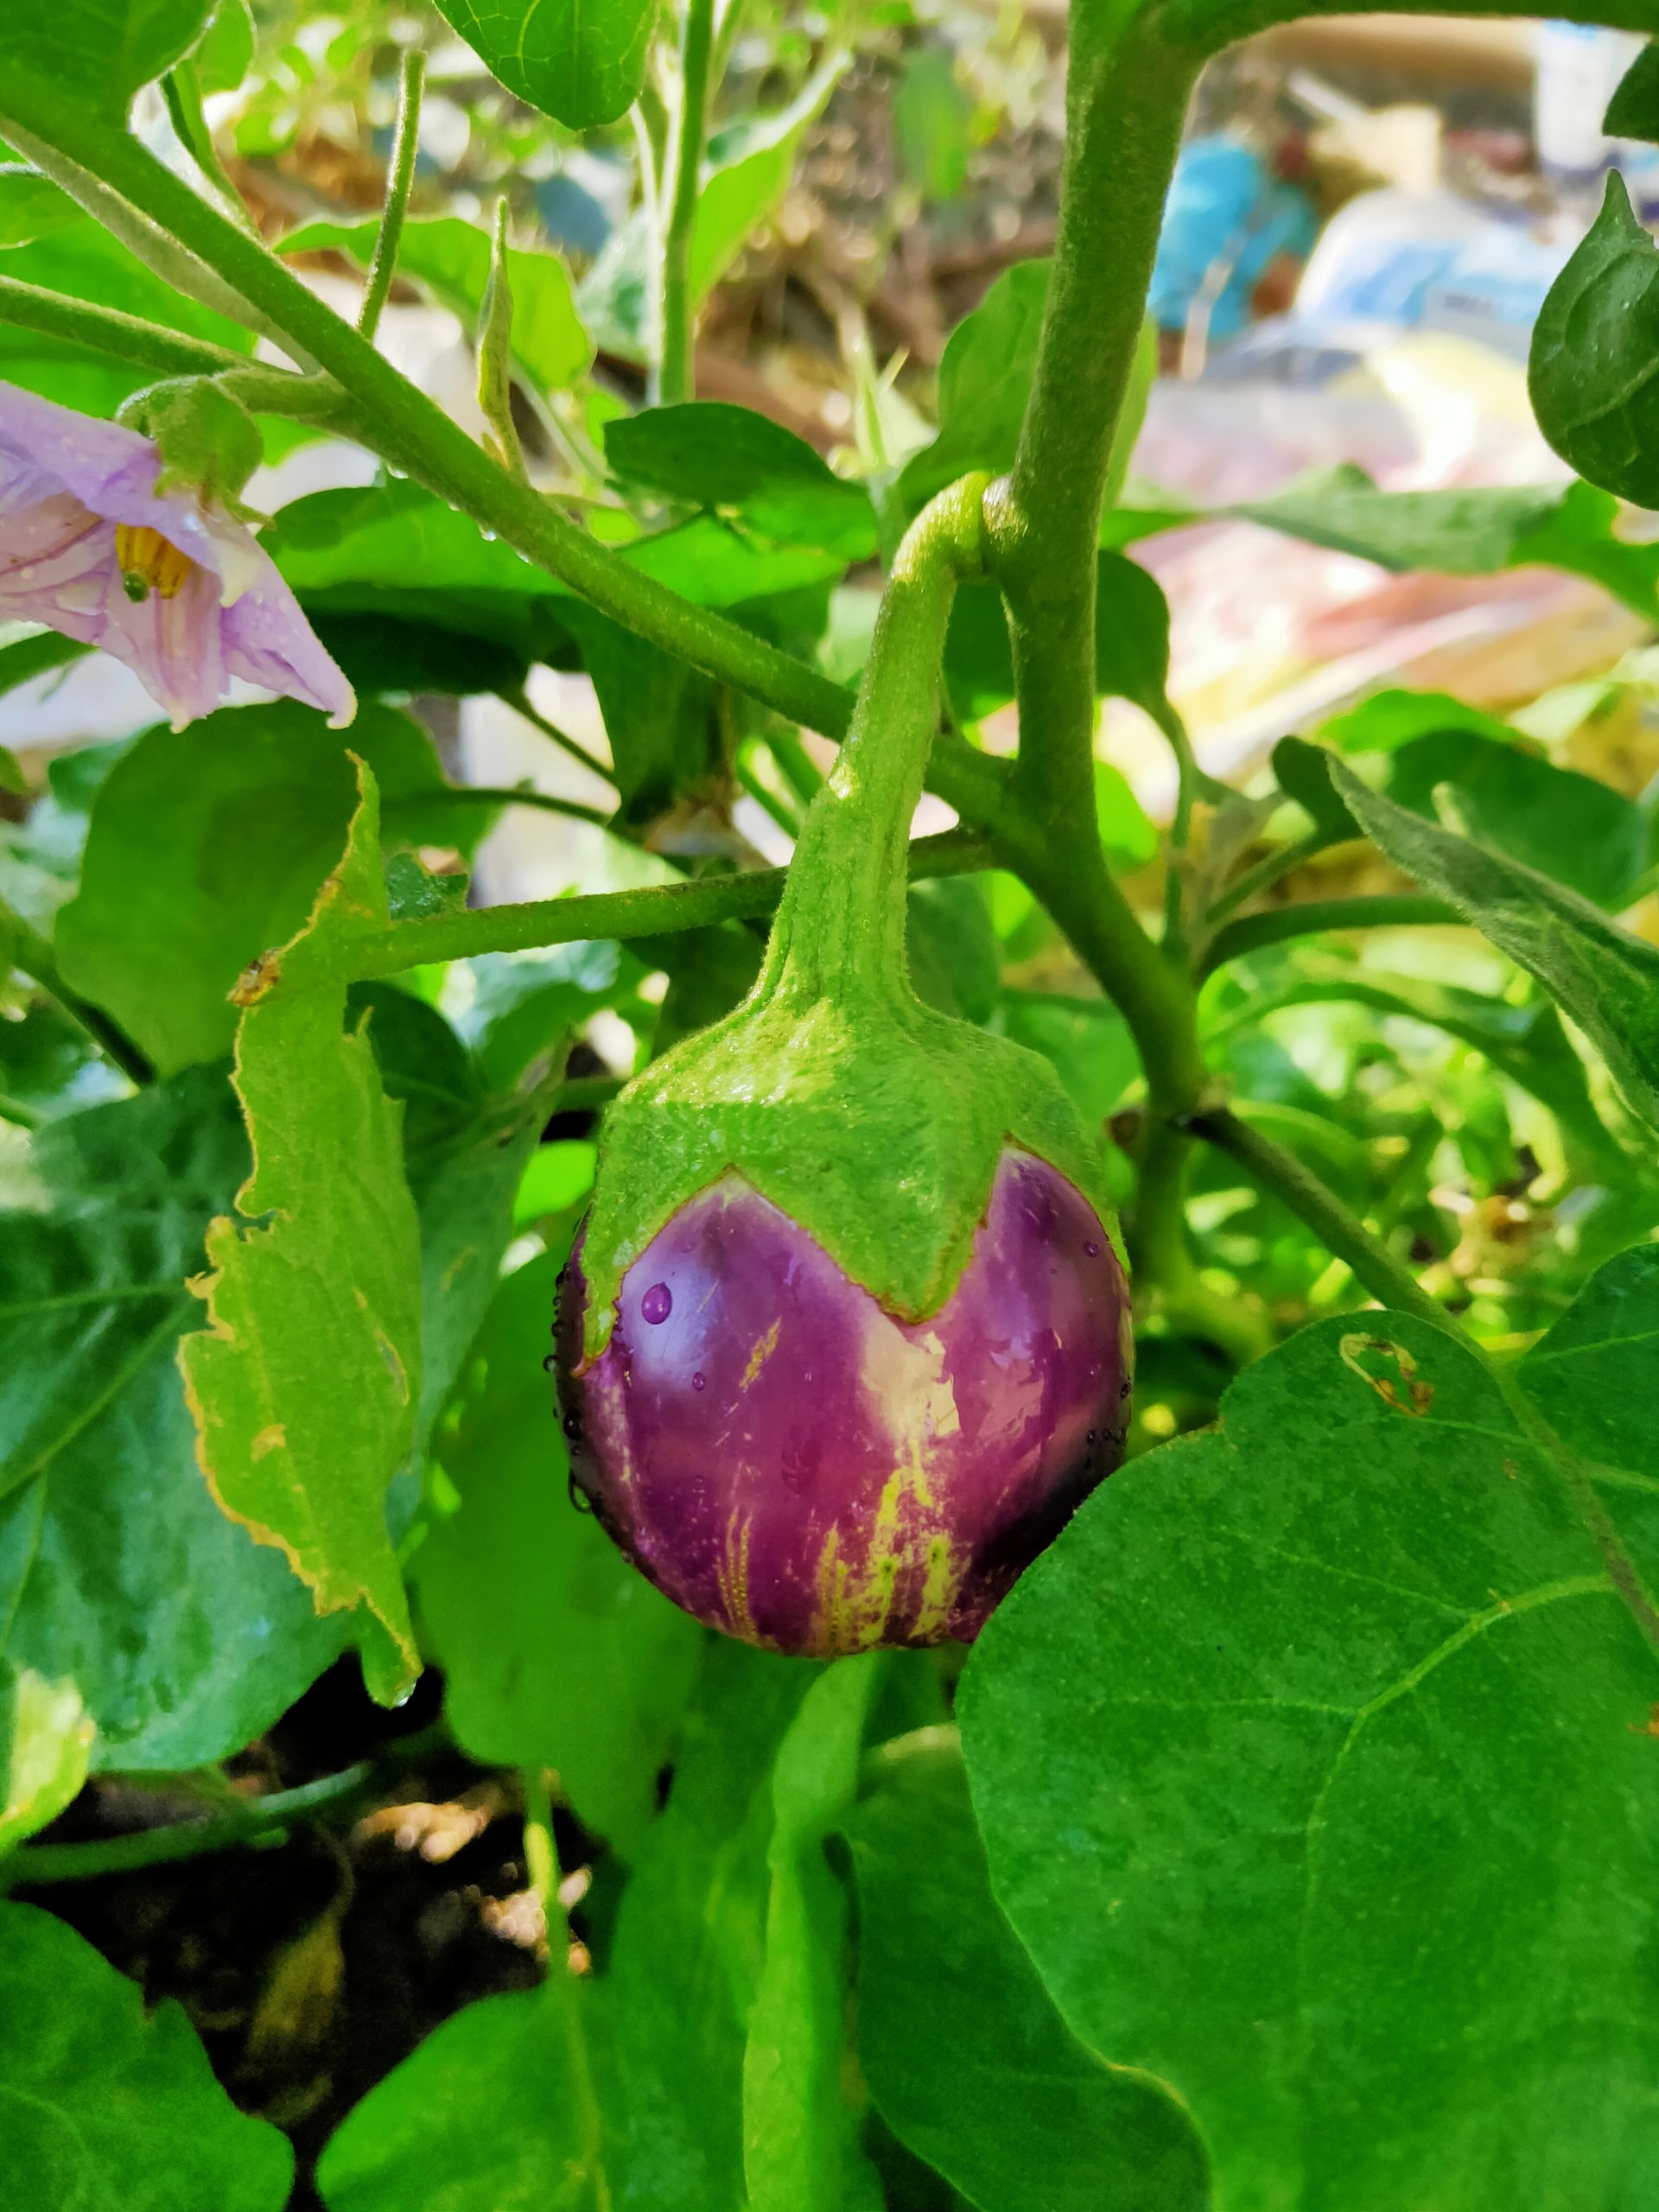 Brinjal on the plant